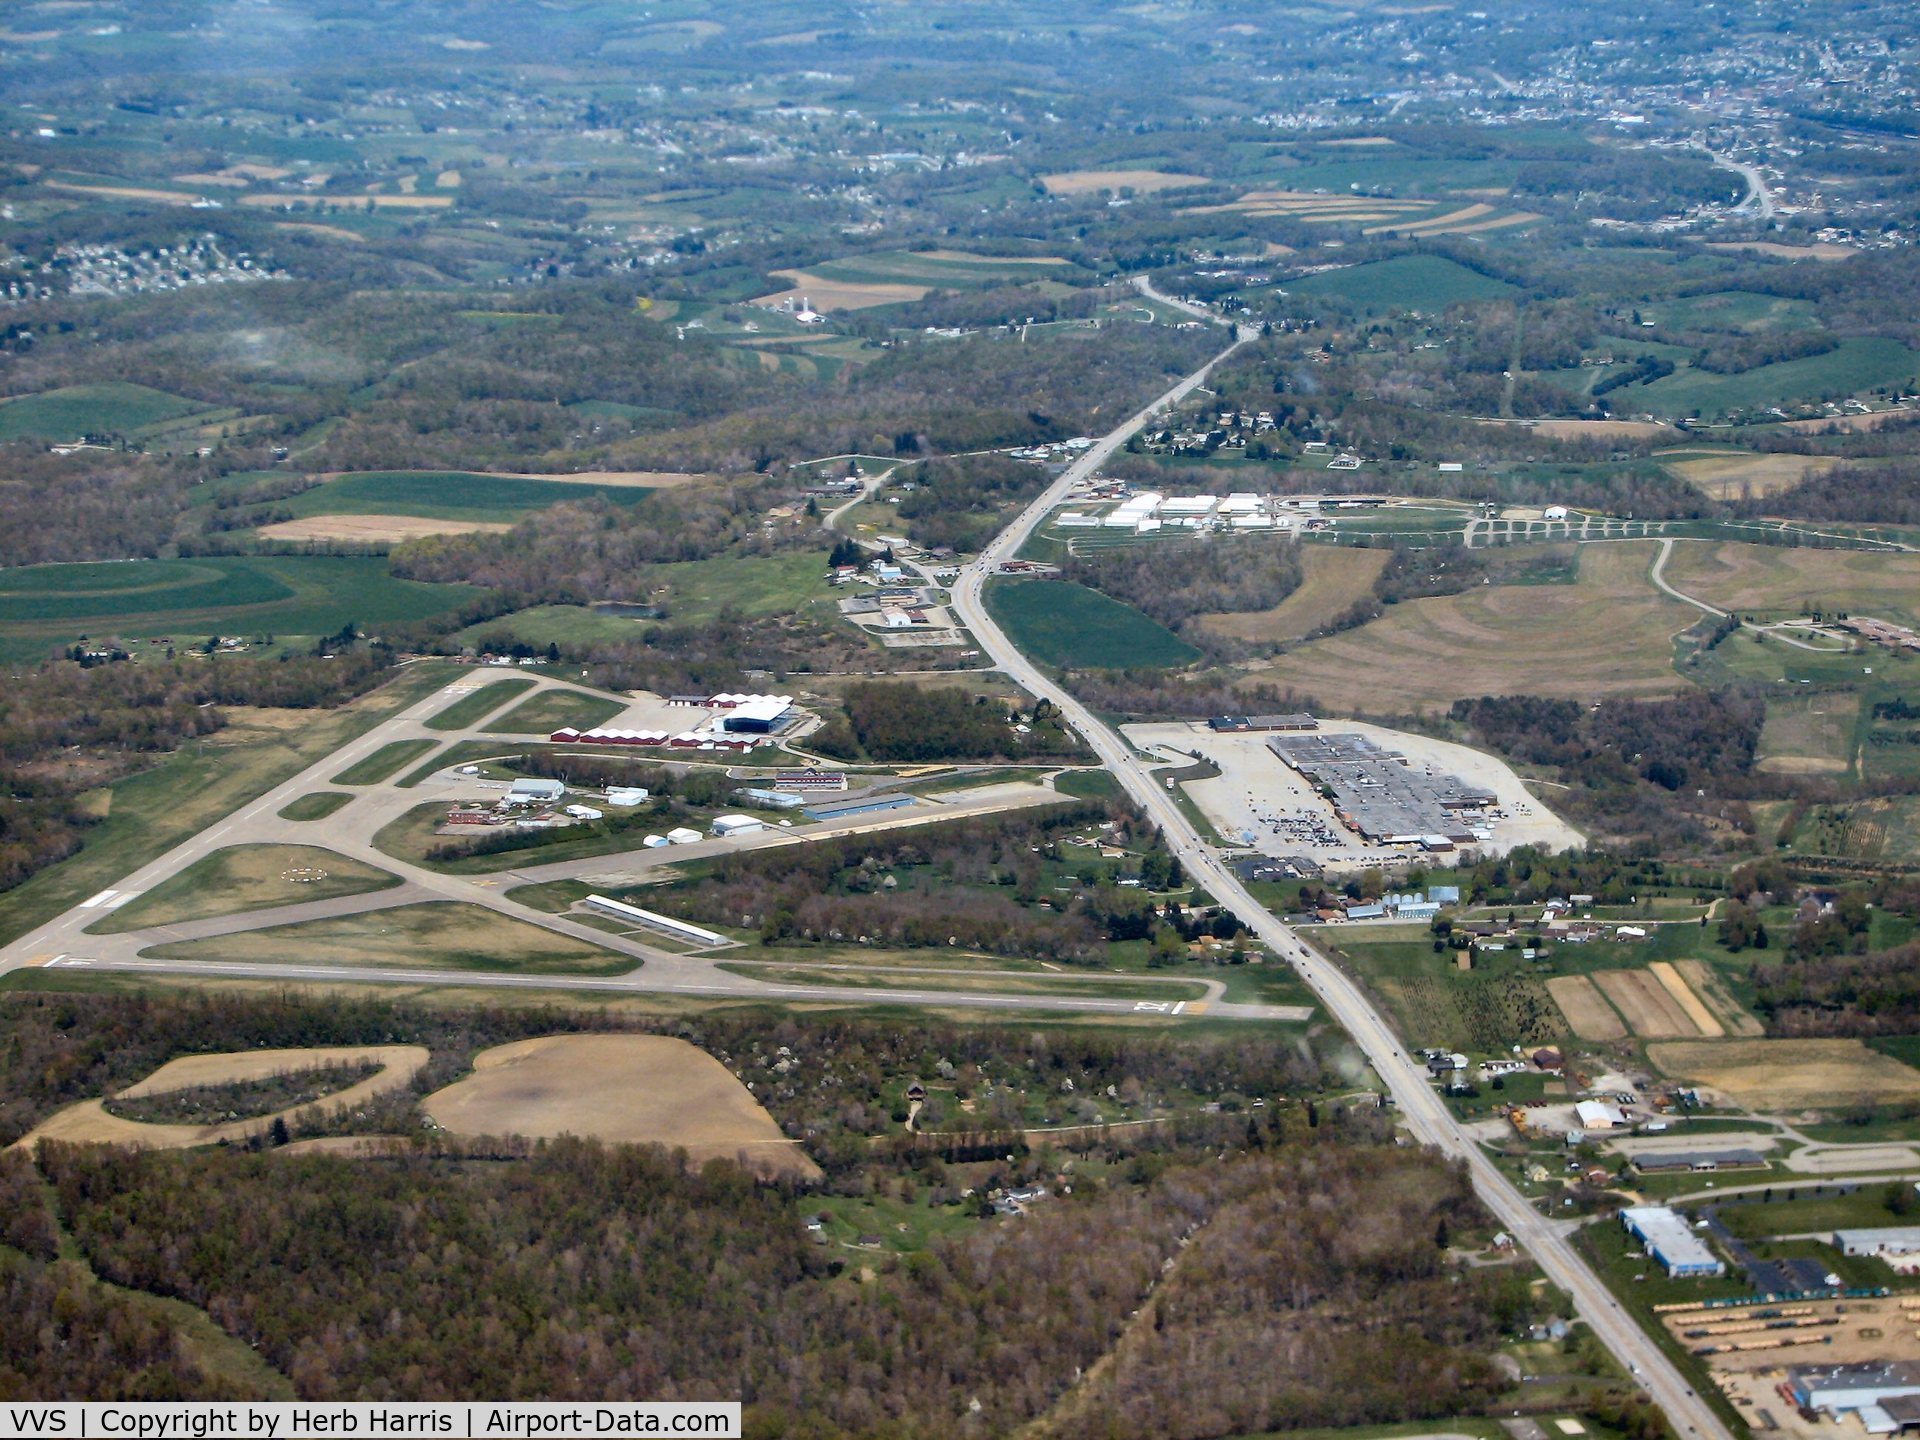 Joseph A. Hardy Connellsville Airport (VVS) - Just popped over the ridge from Seven springs and there she is